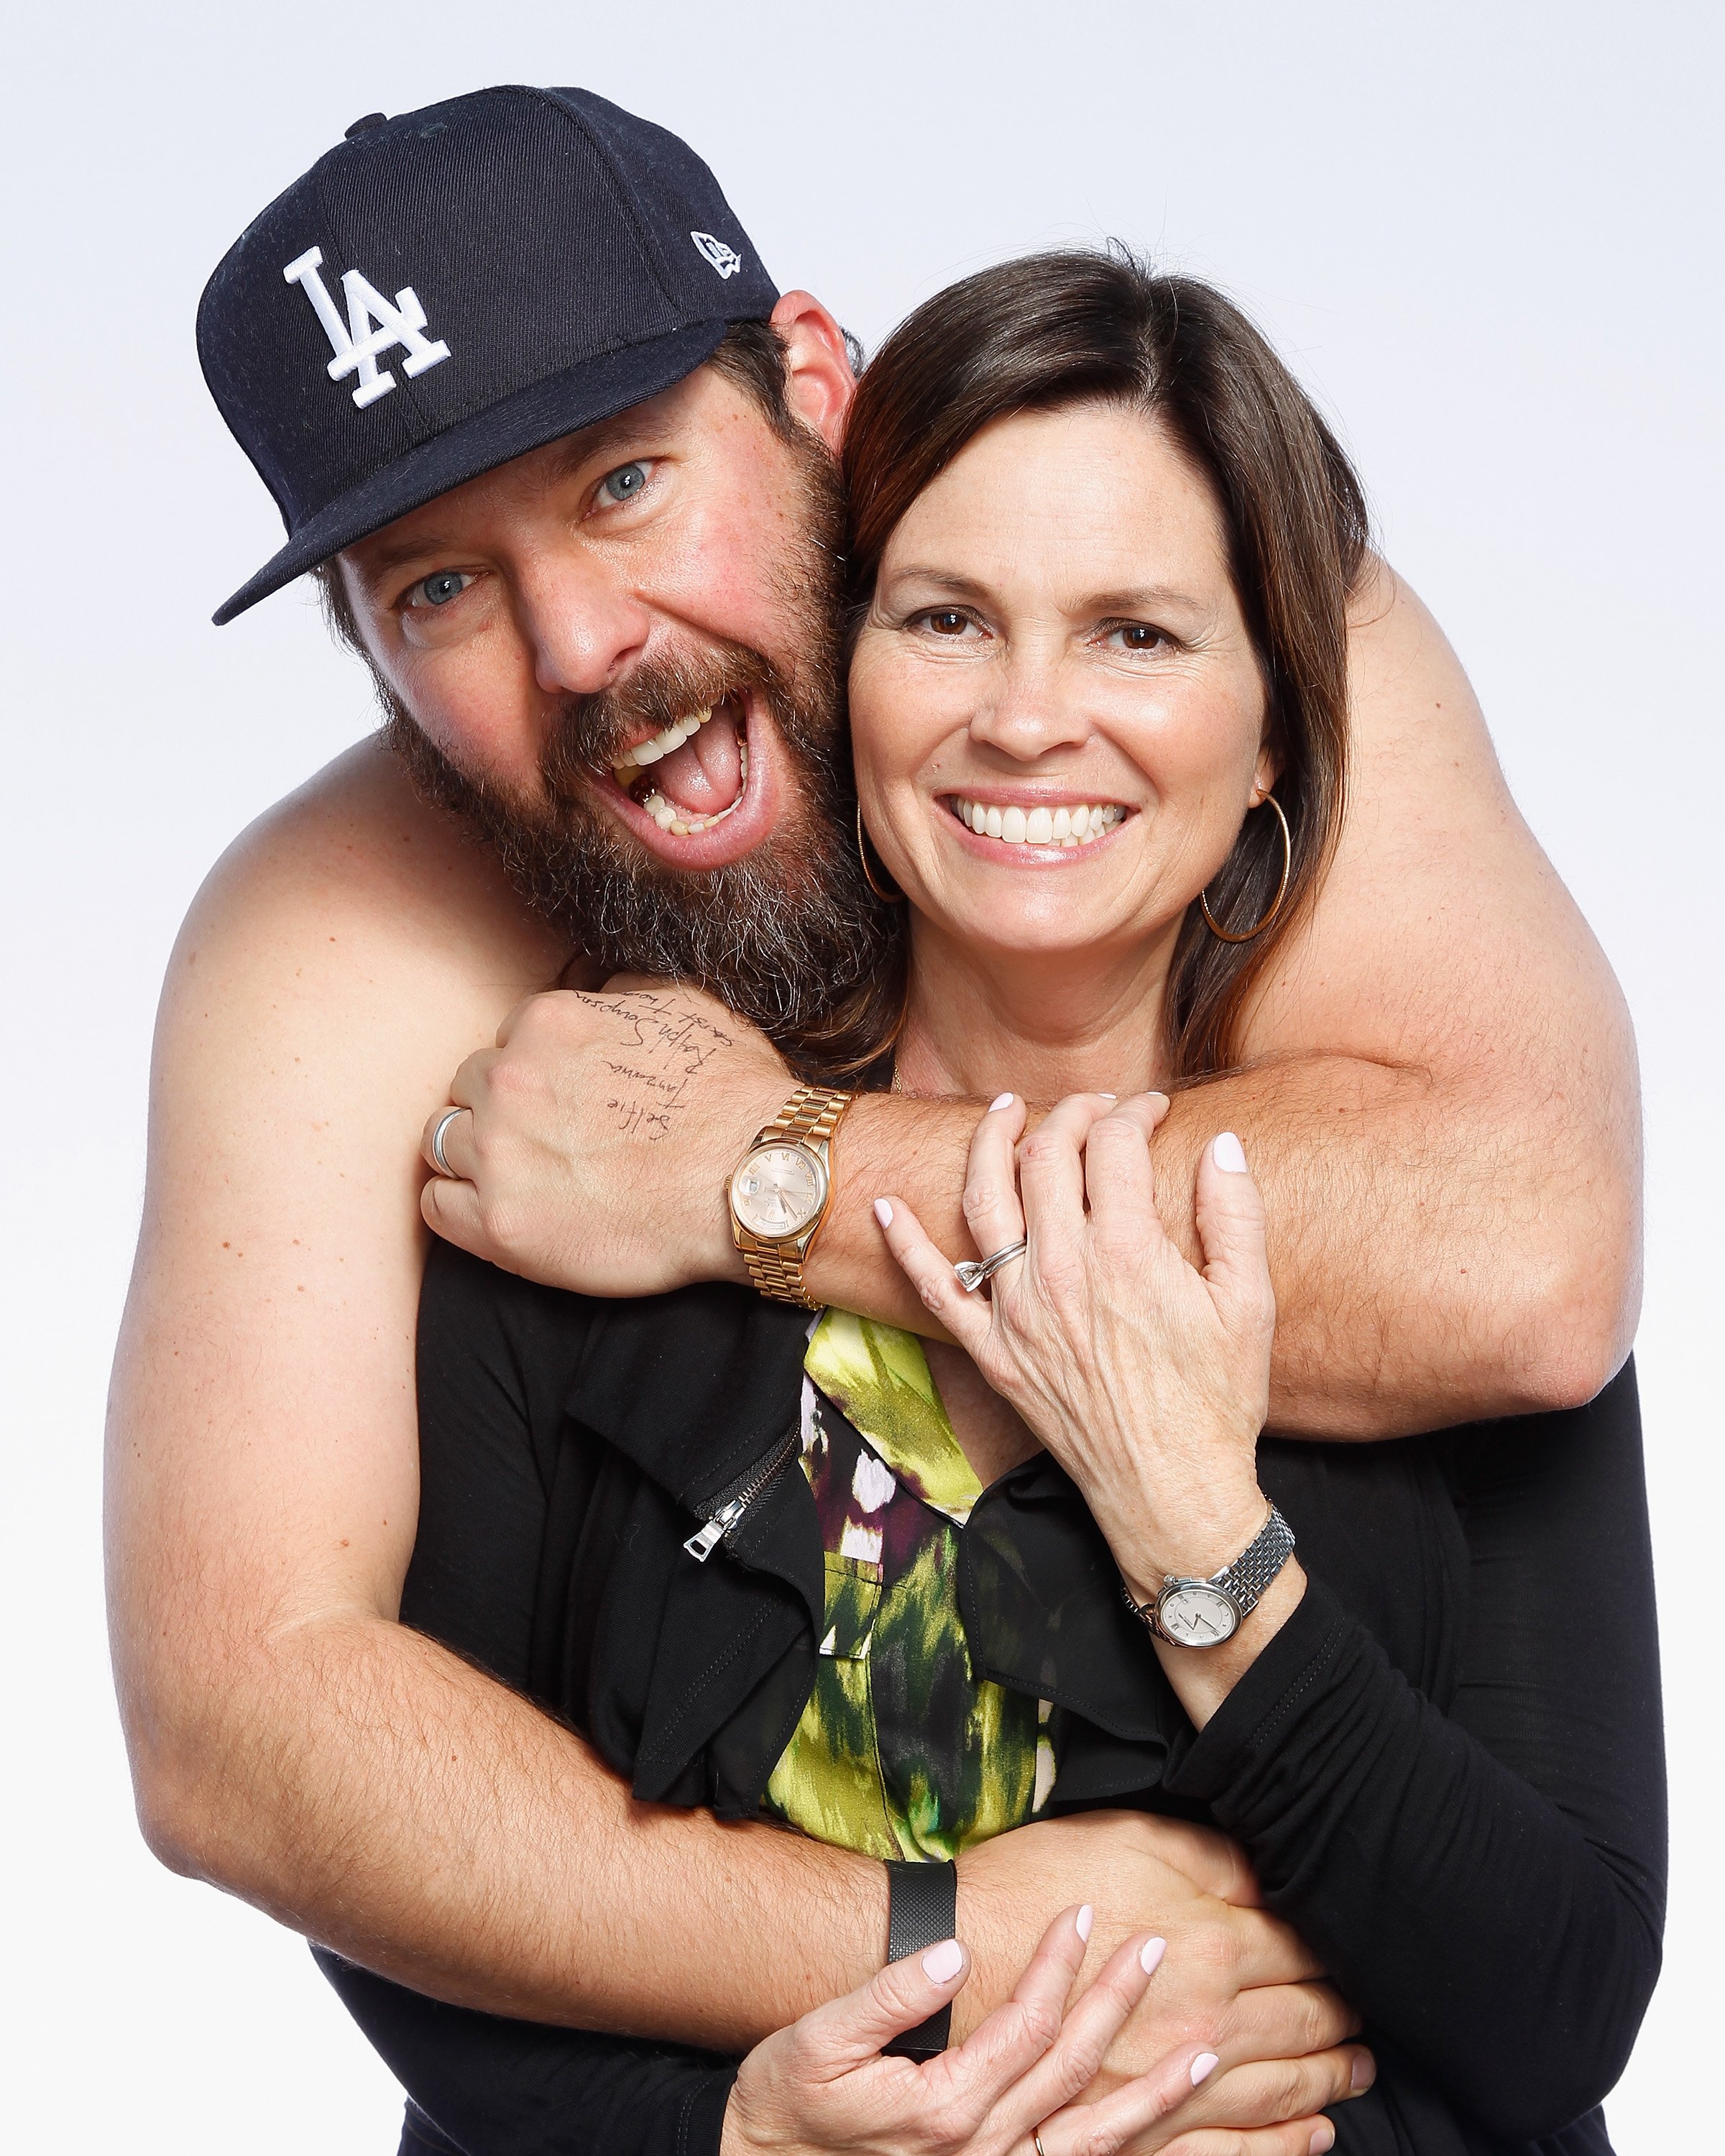 Bert and LeeAnn Kreischer pose after Bert's performance at The Ice House Comedy Club in Pasadena | Source: Getty Images